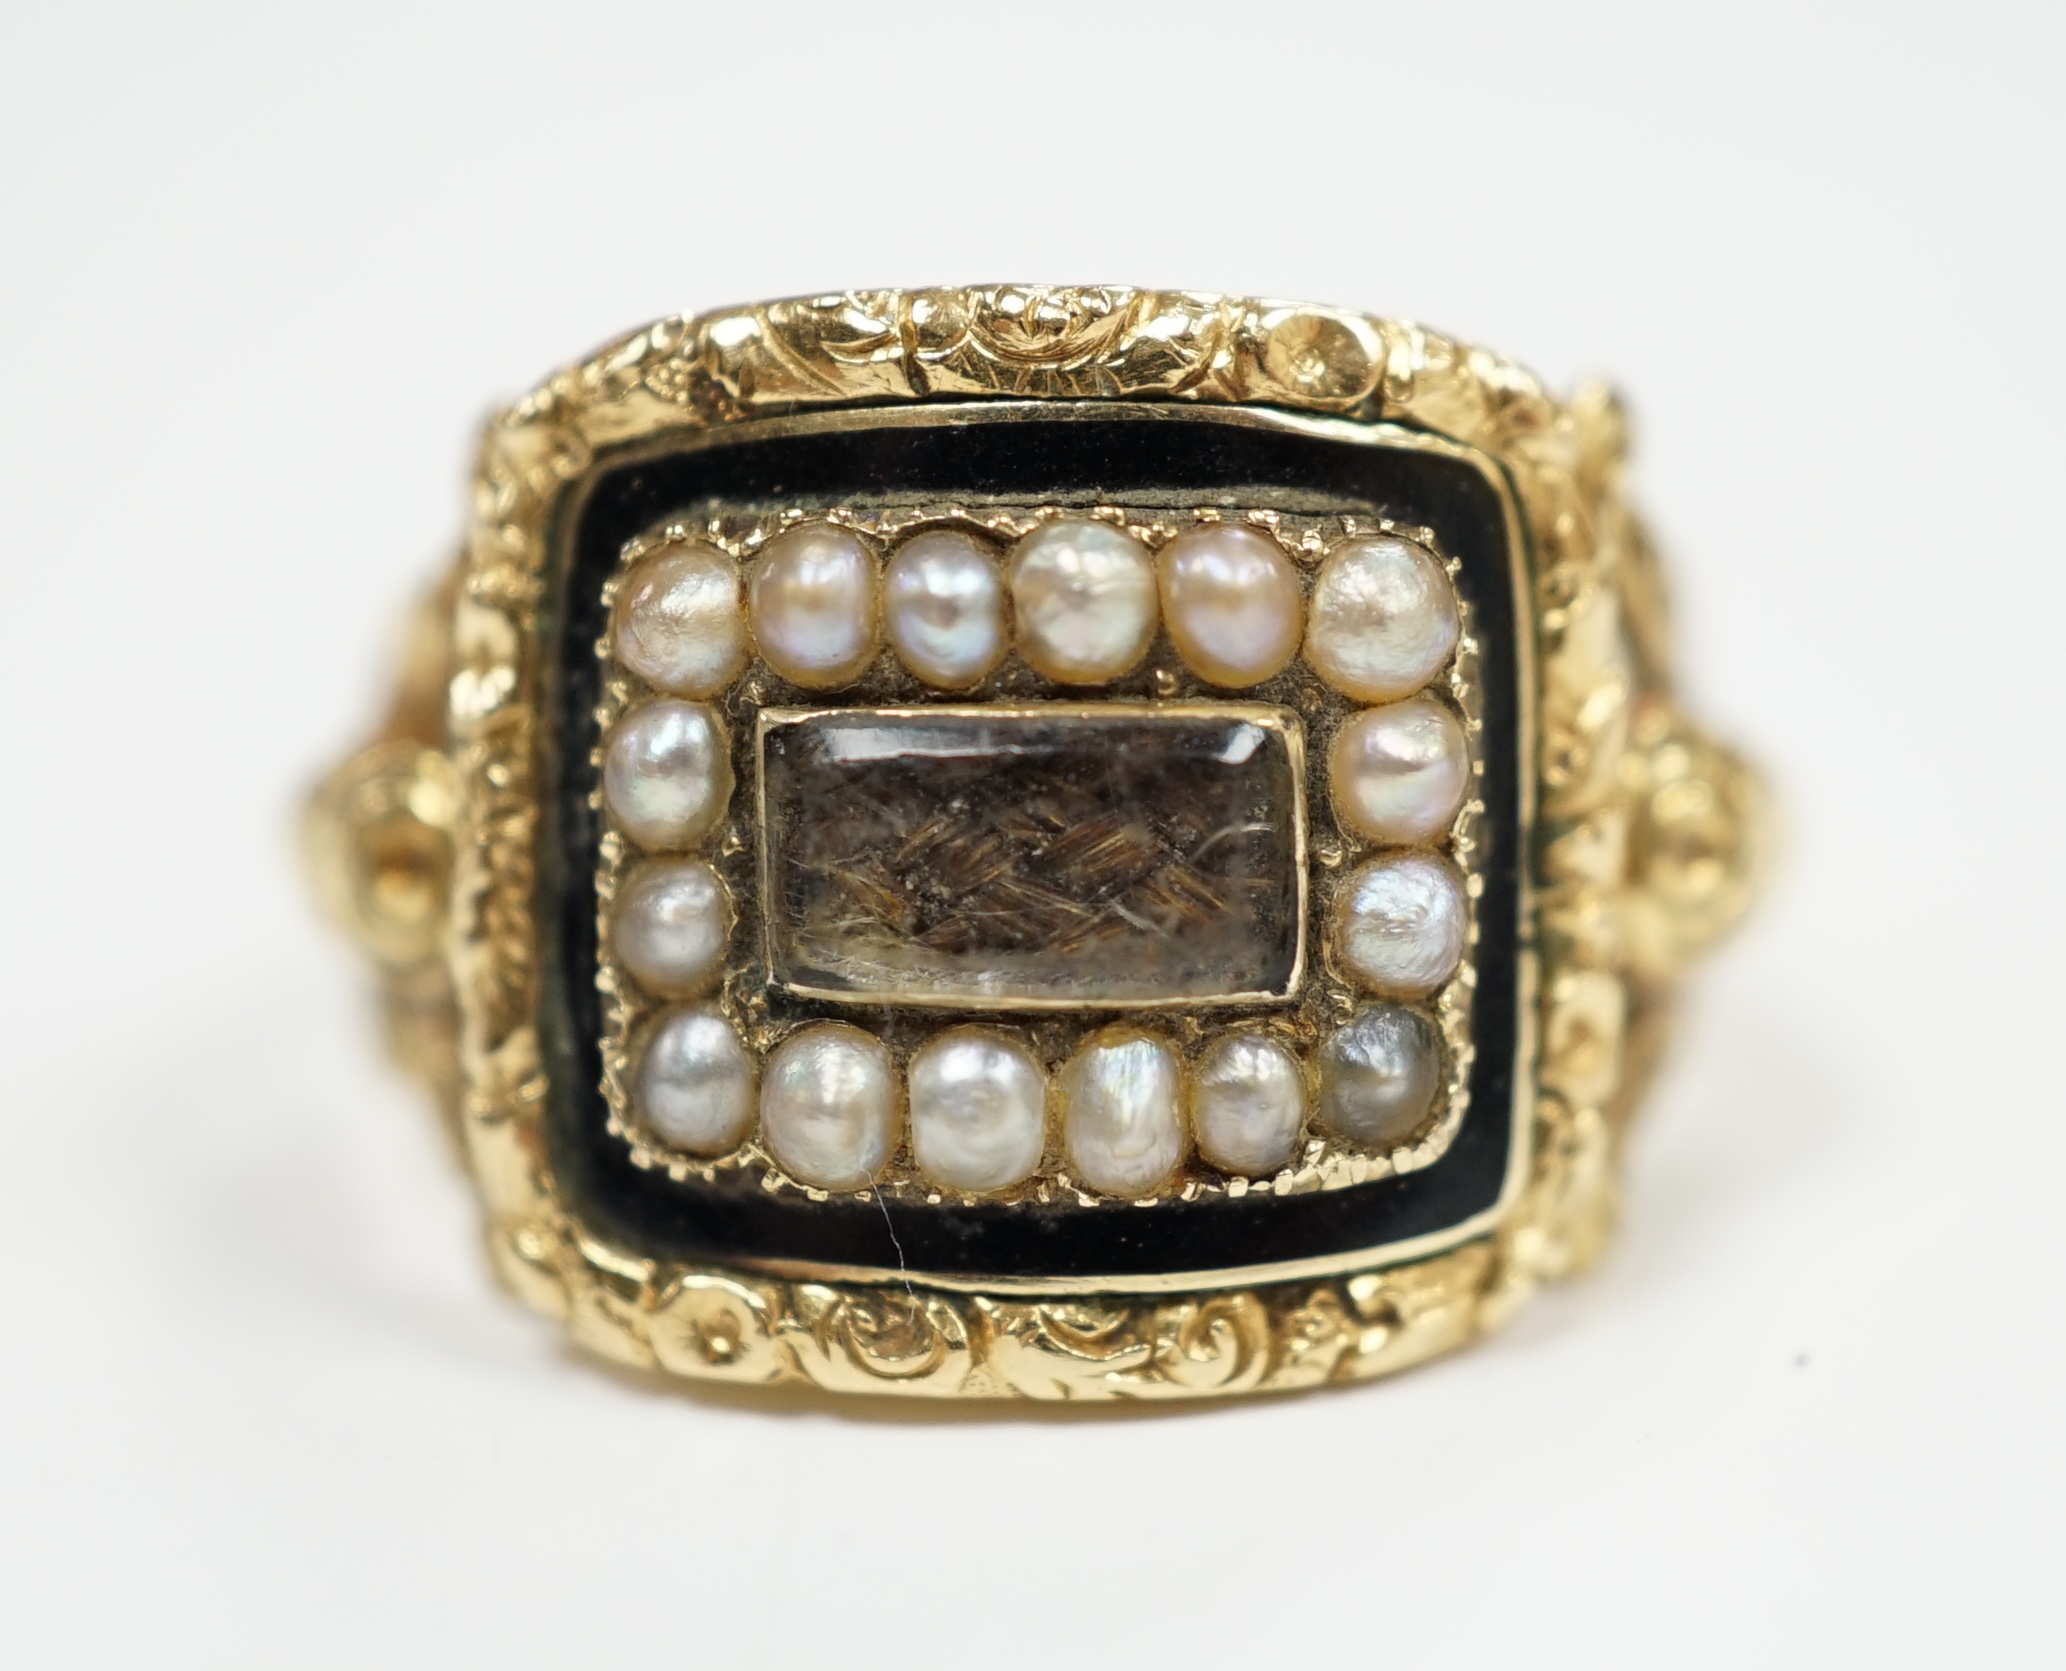 A George IV 18ct gold, black enamel and seed pearl set mourning ring, with plaited hair beneath a glazed panel, size Q, gross weight 5.6 grams, hallmarked for London, 1829.